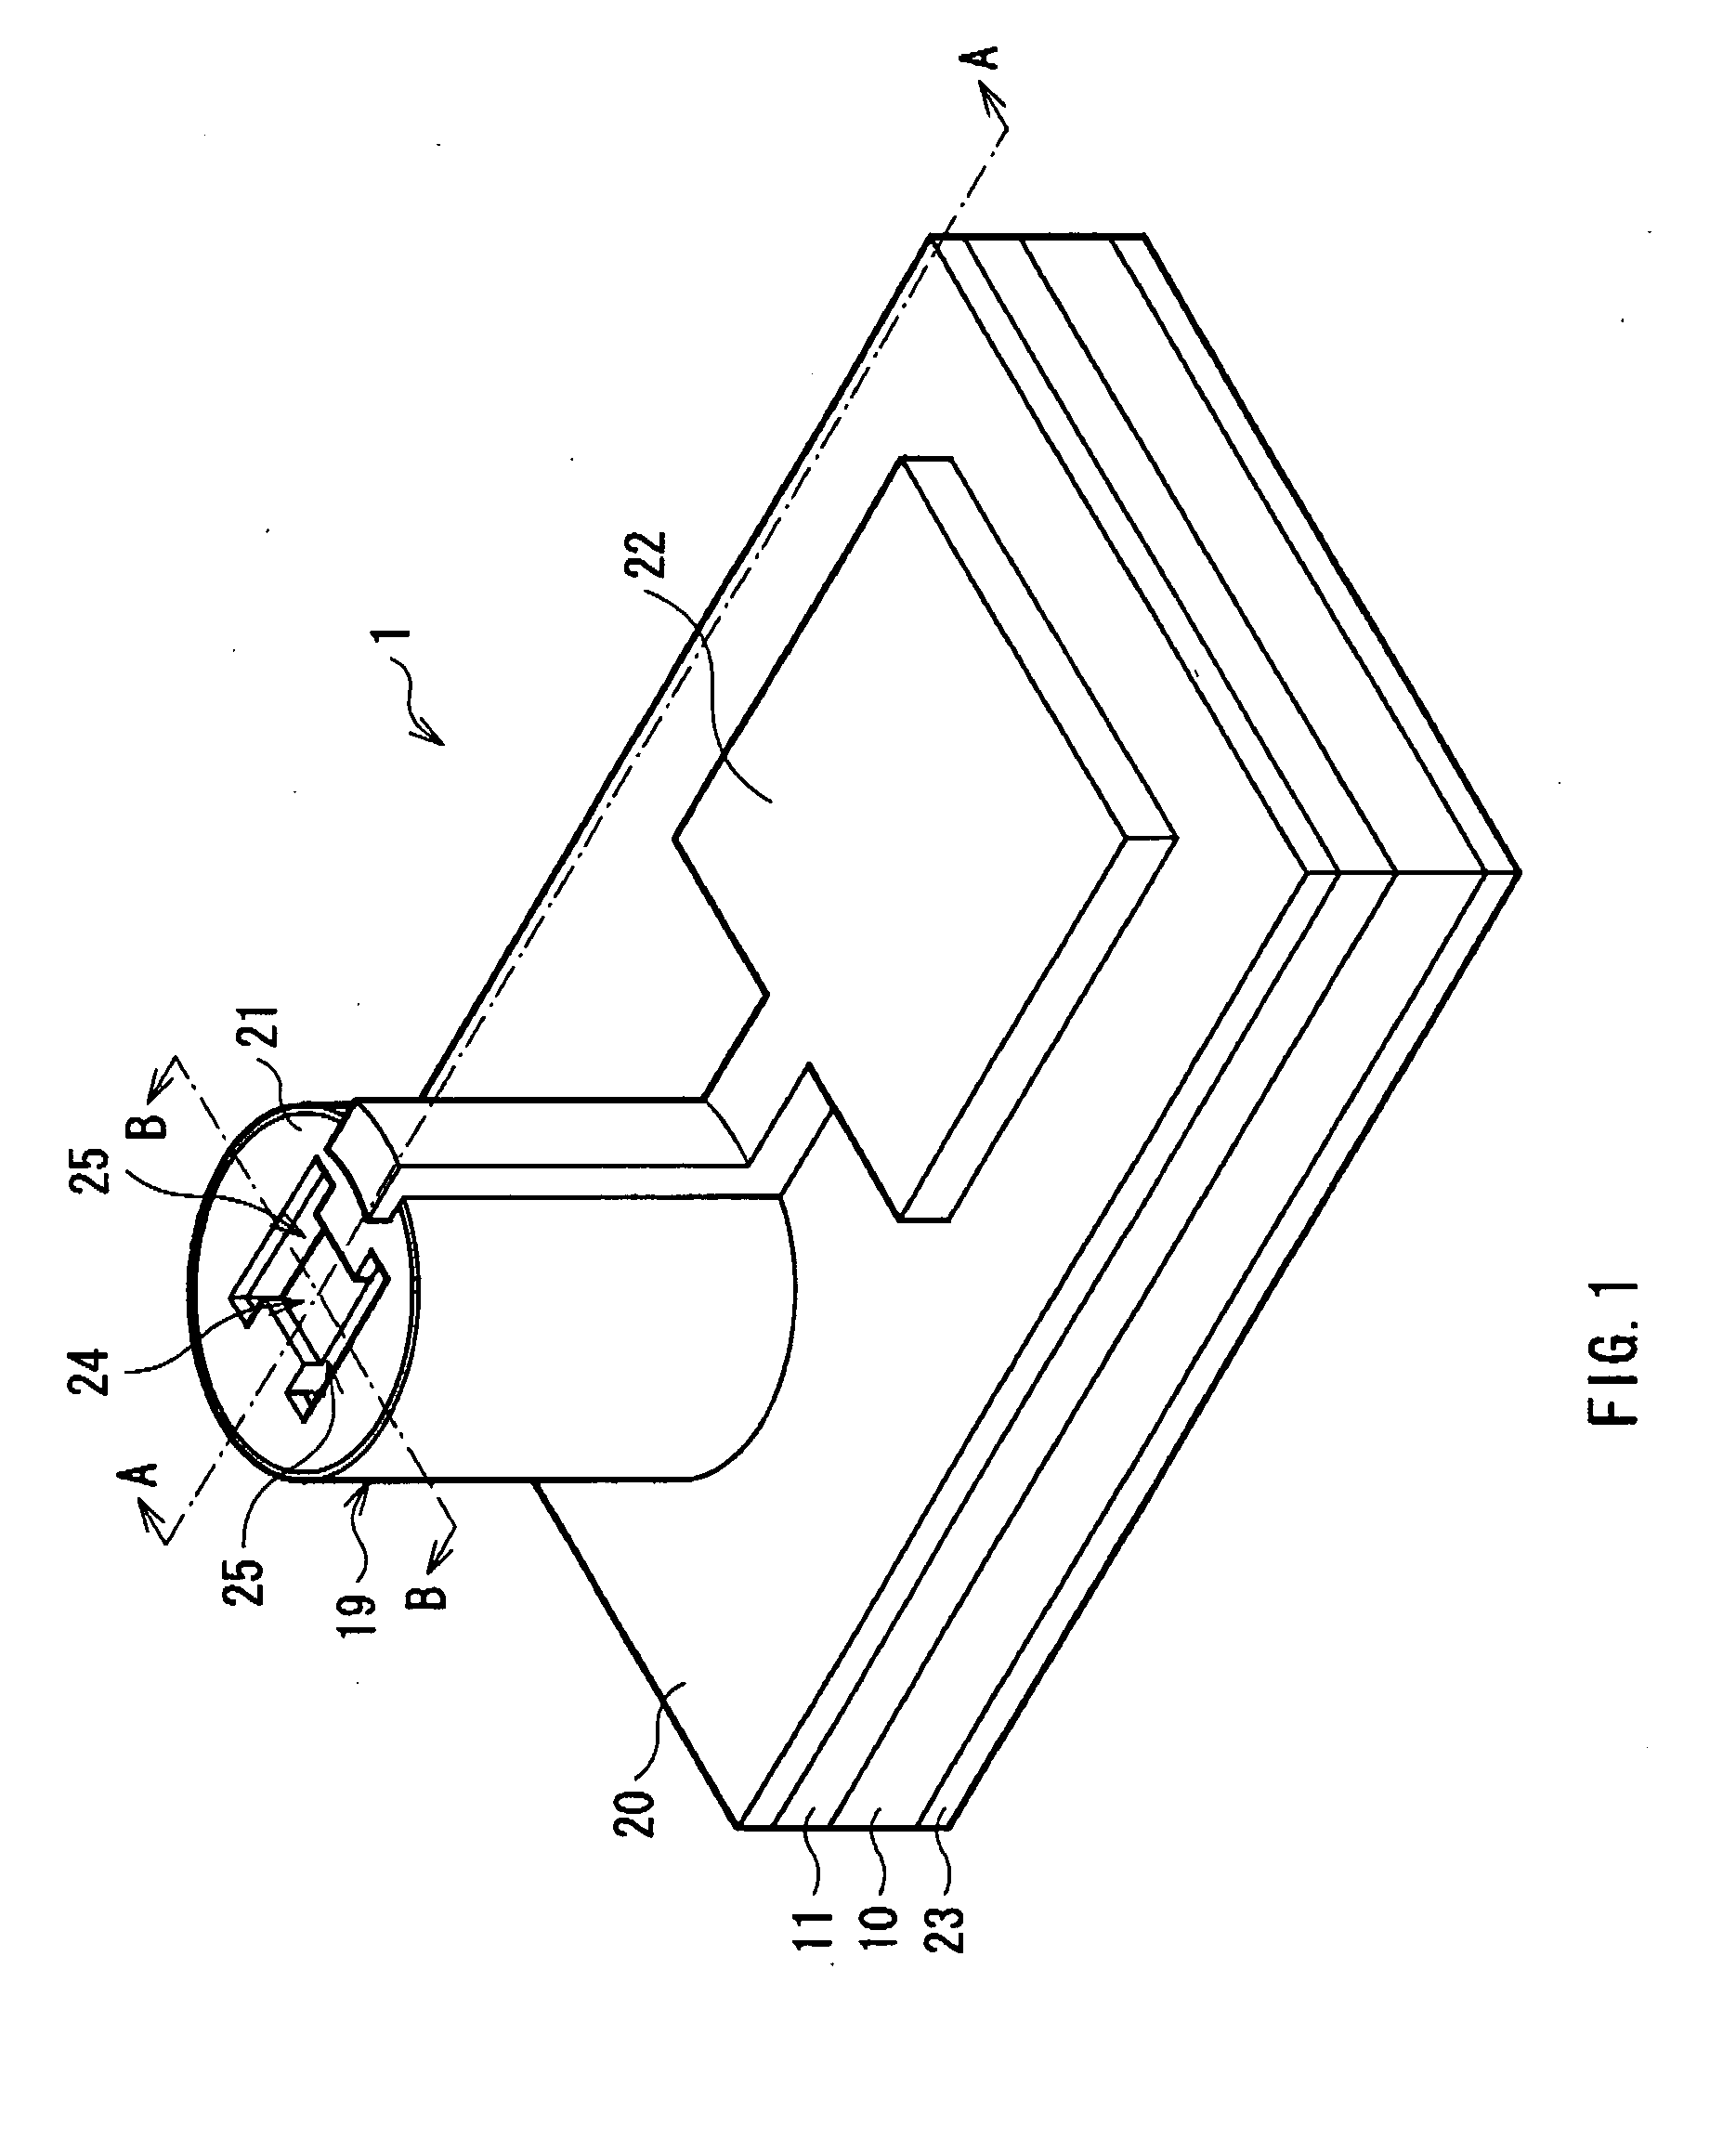 Vertical cavity surface emitting laser and method of manufacturing it